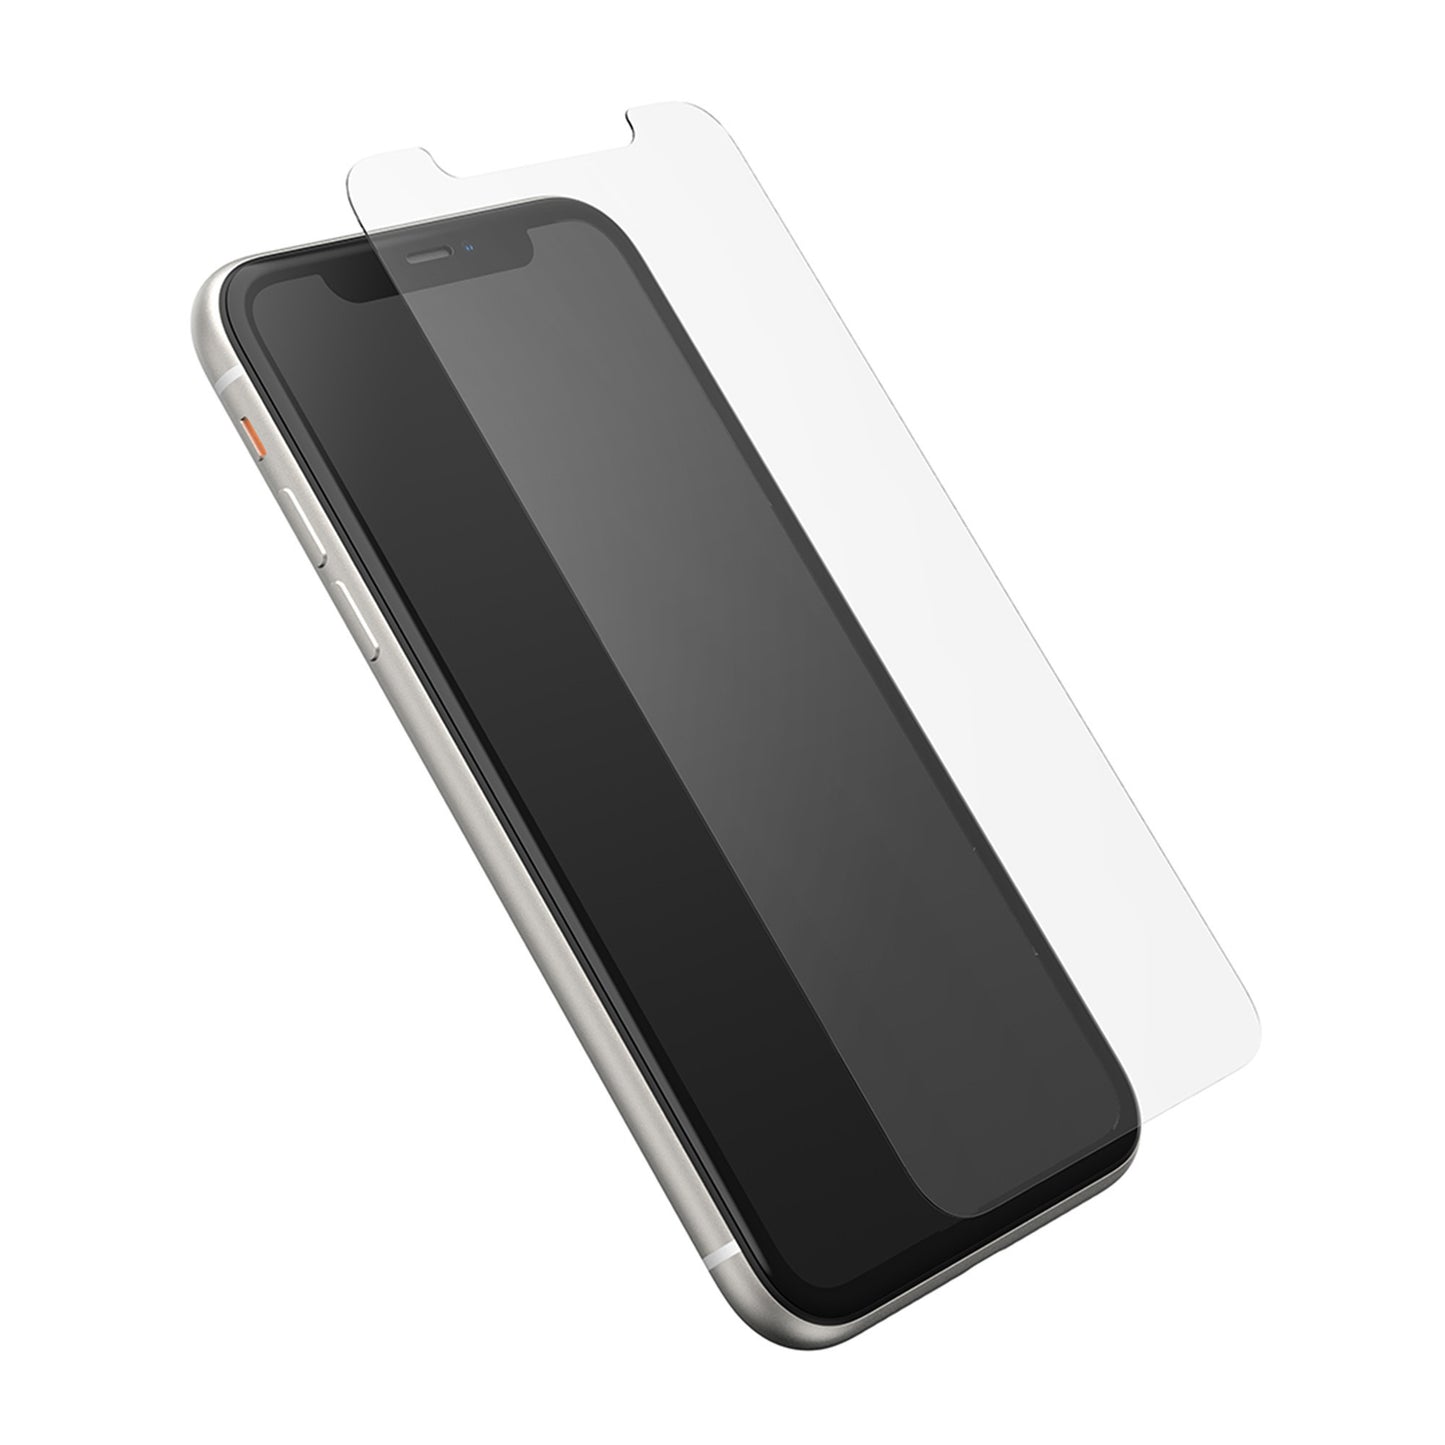 iPhone 11/XR Otterbox Trusted Glass screen protector - 15-07749